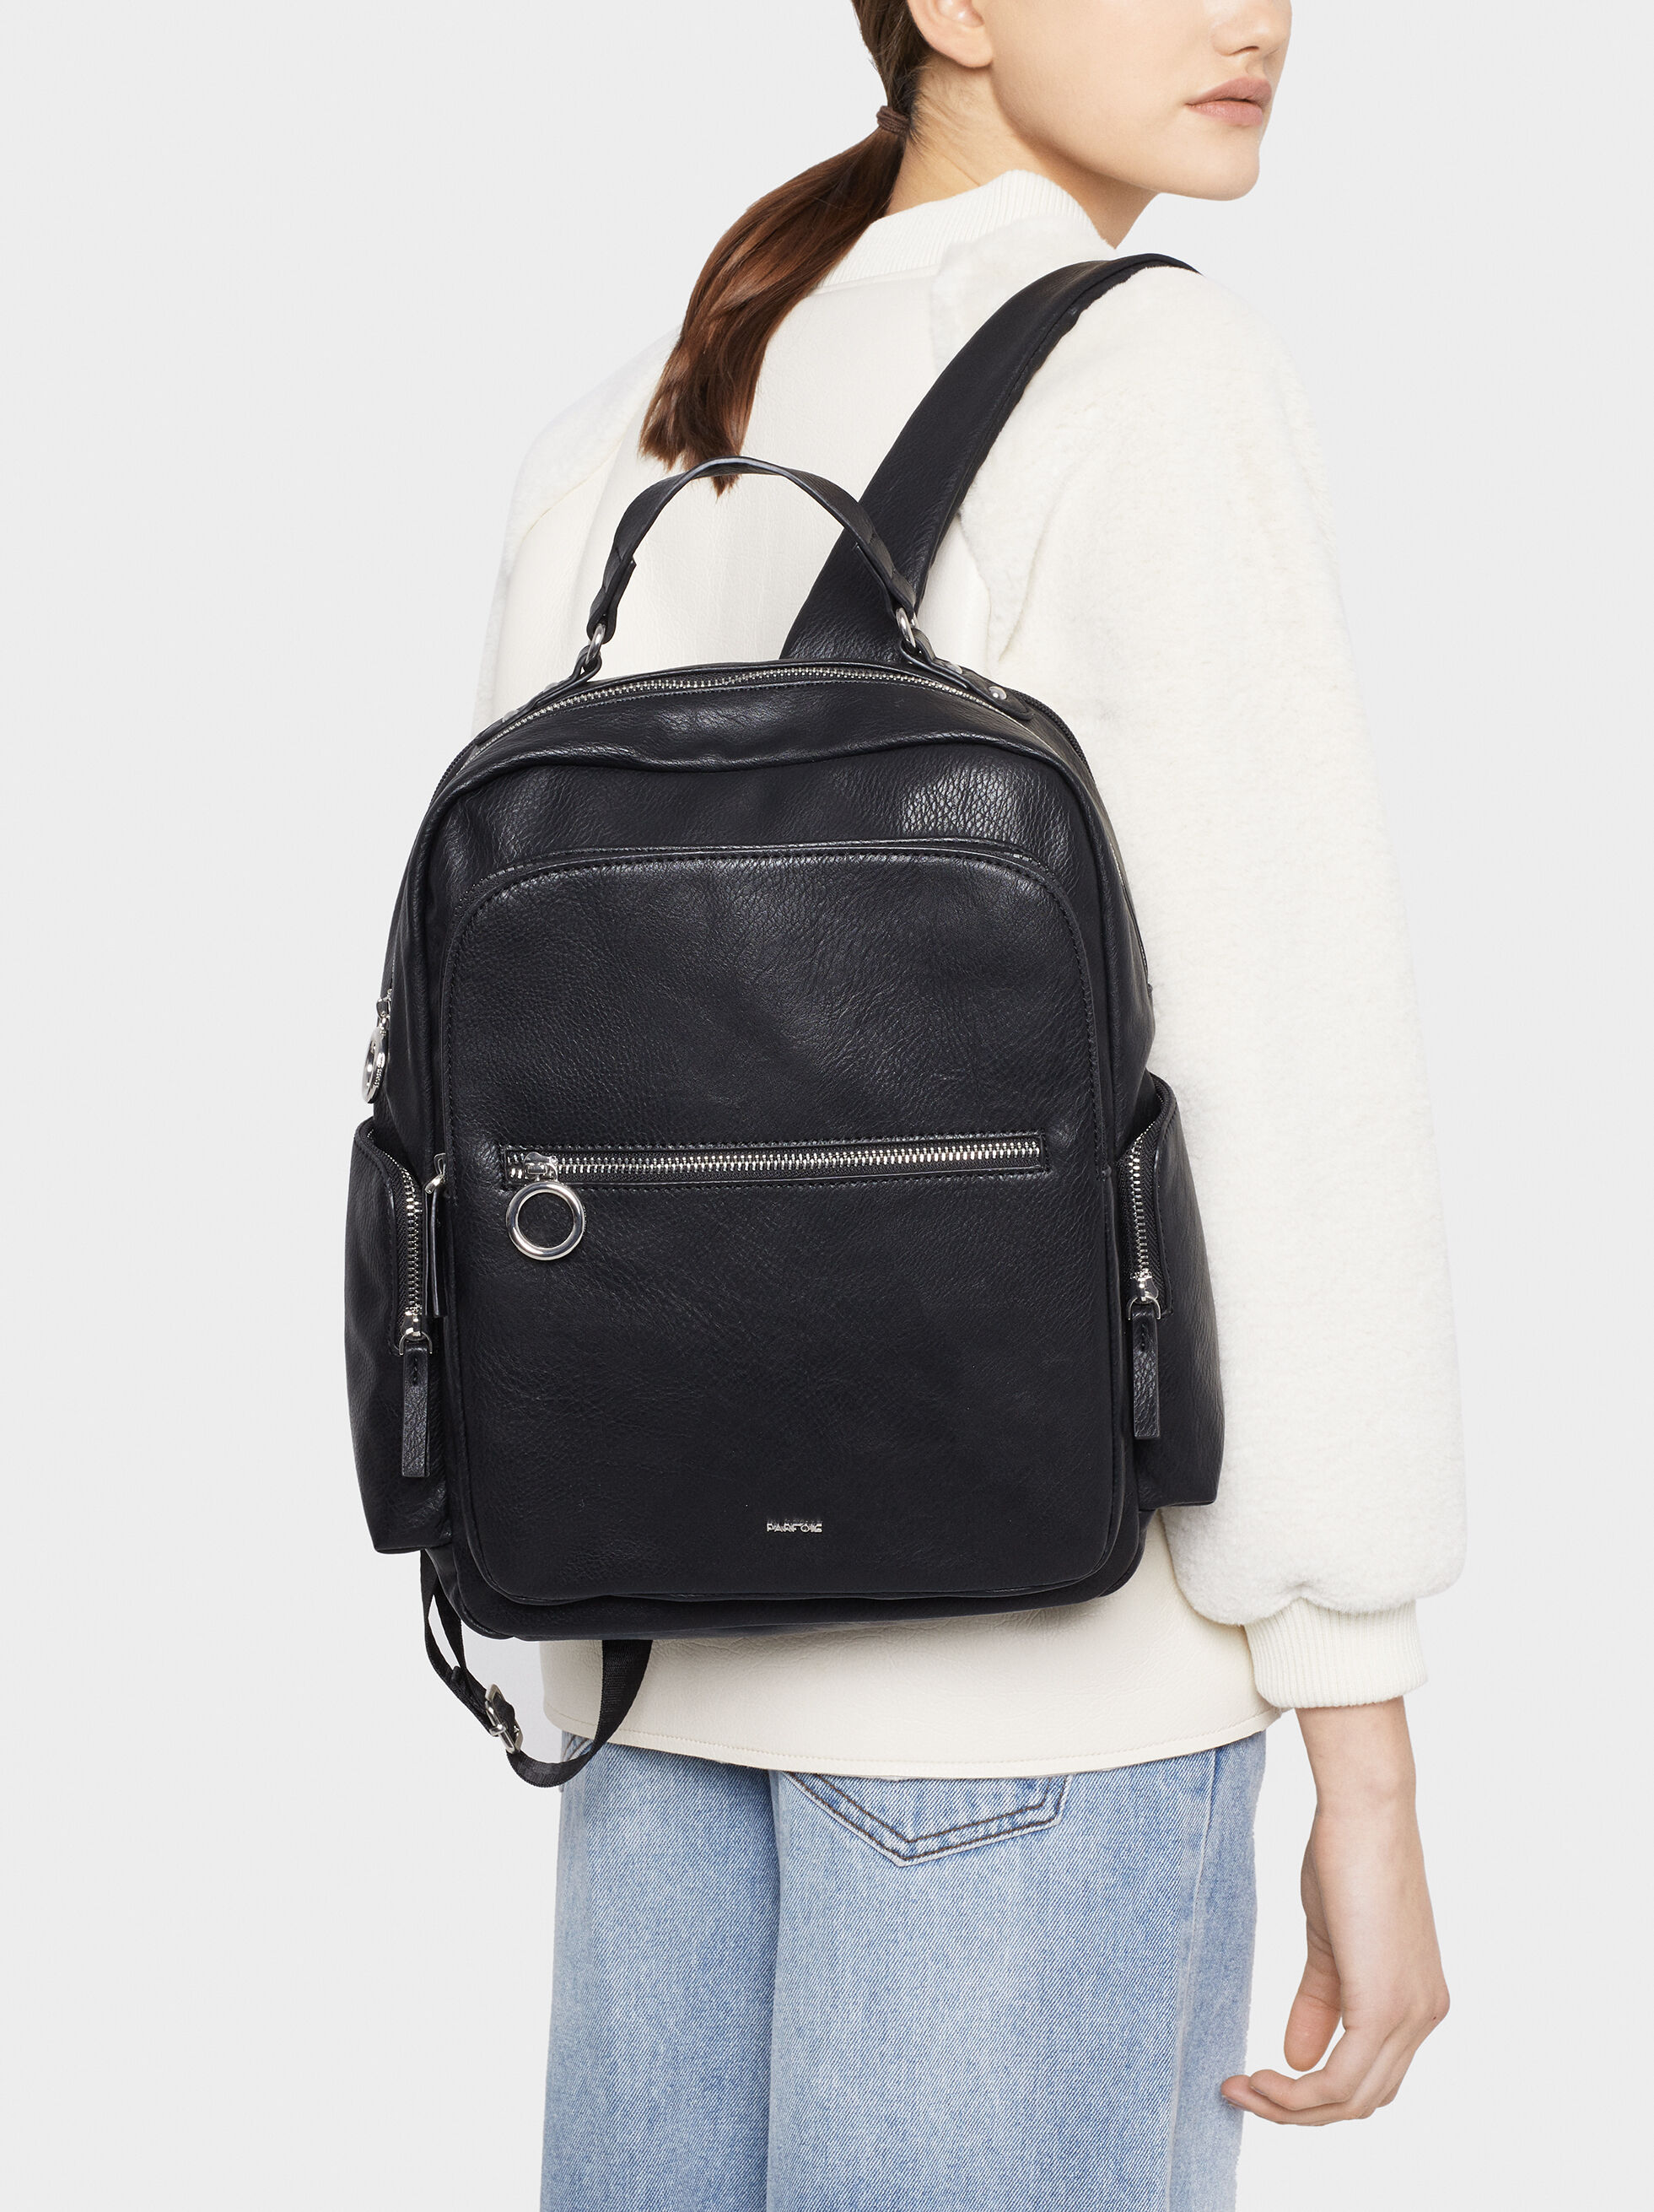 backpacks that have a lot of pockets